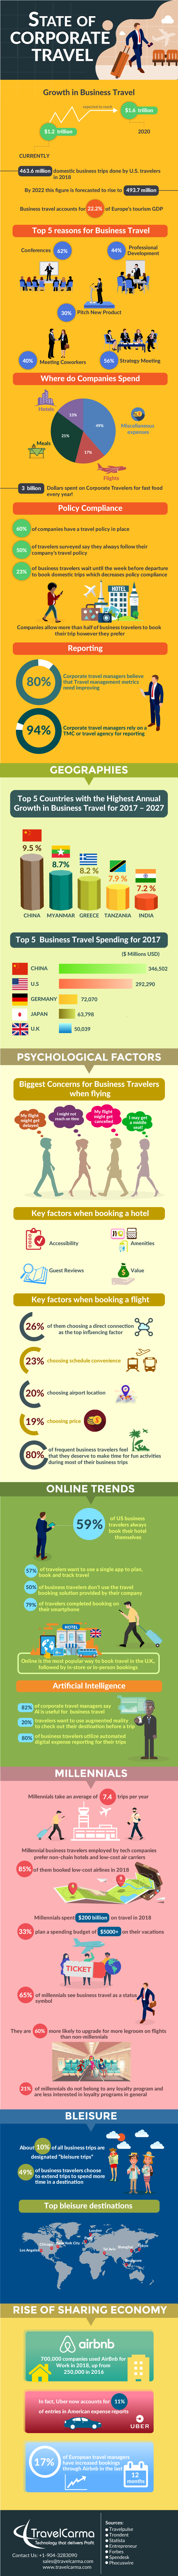 Business Travel infographic, corporate travel, business travel trends